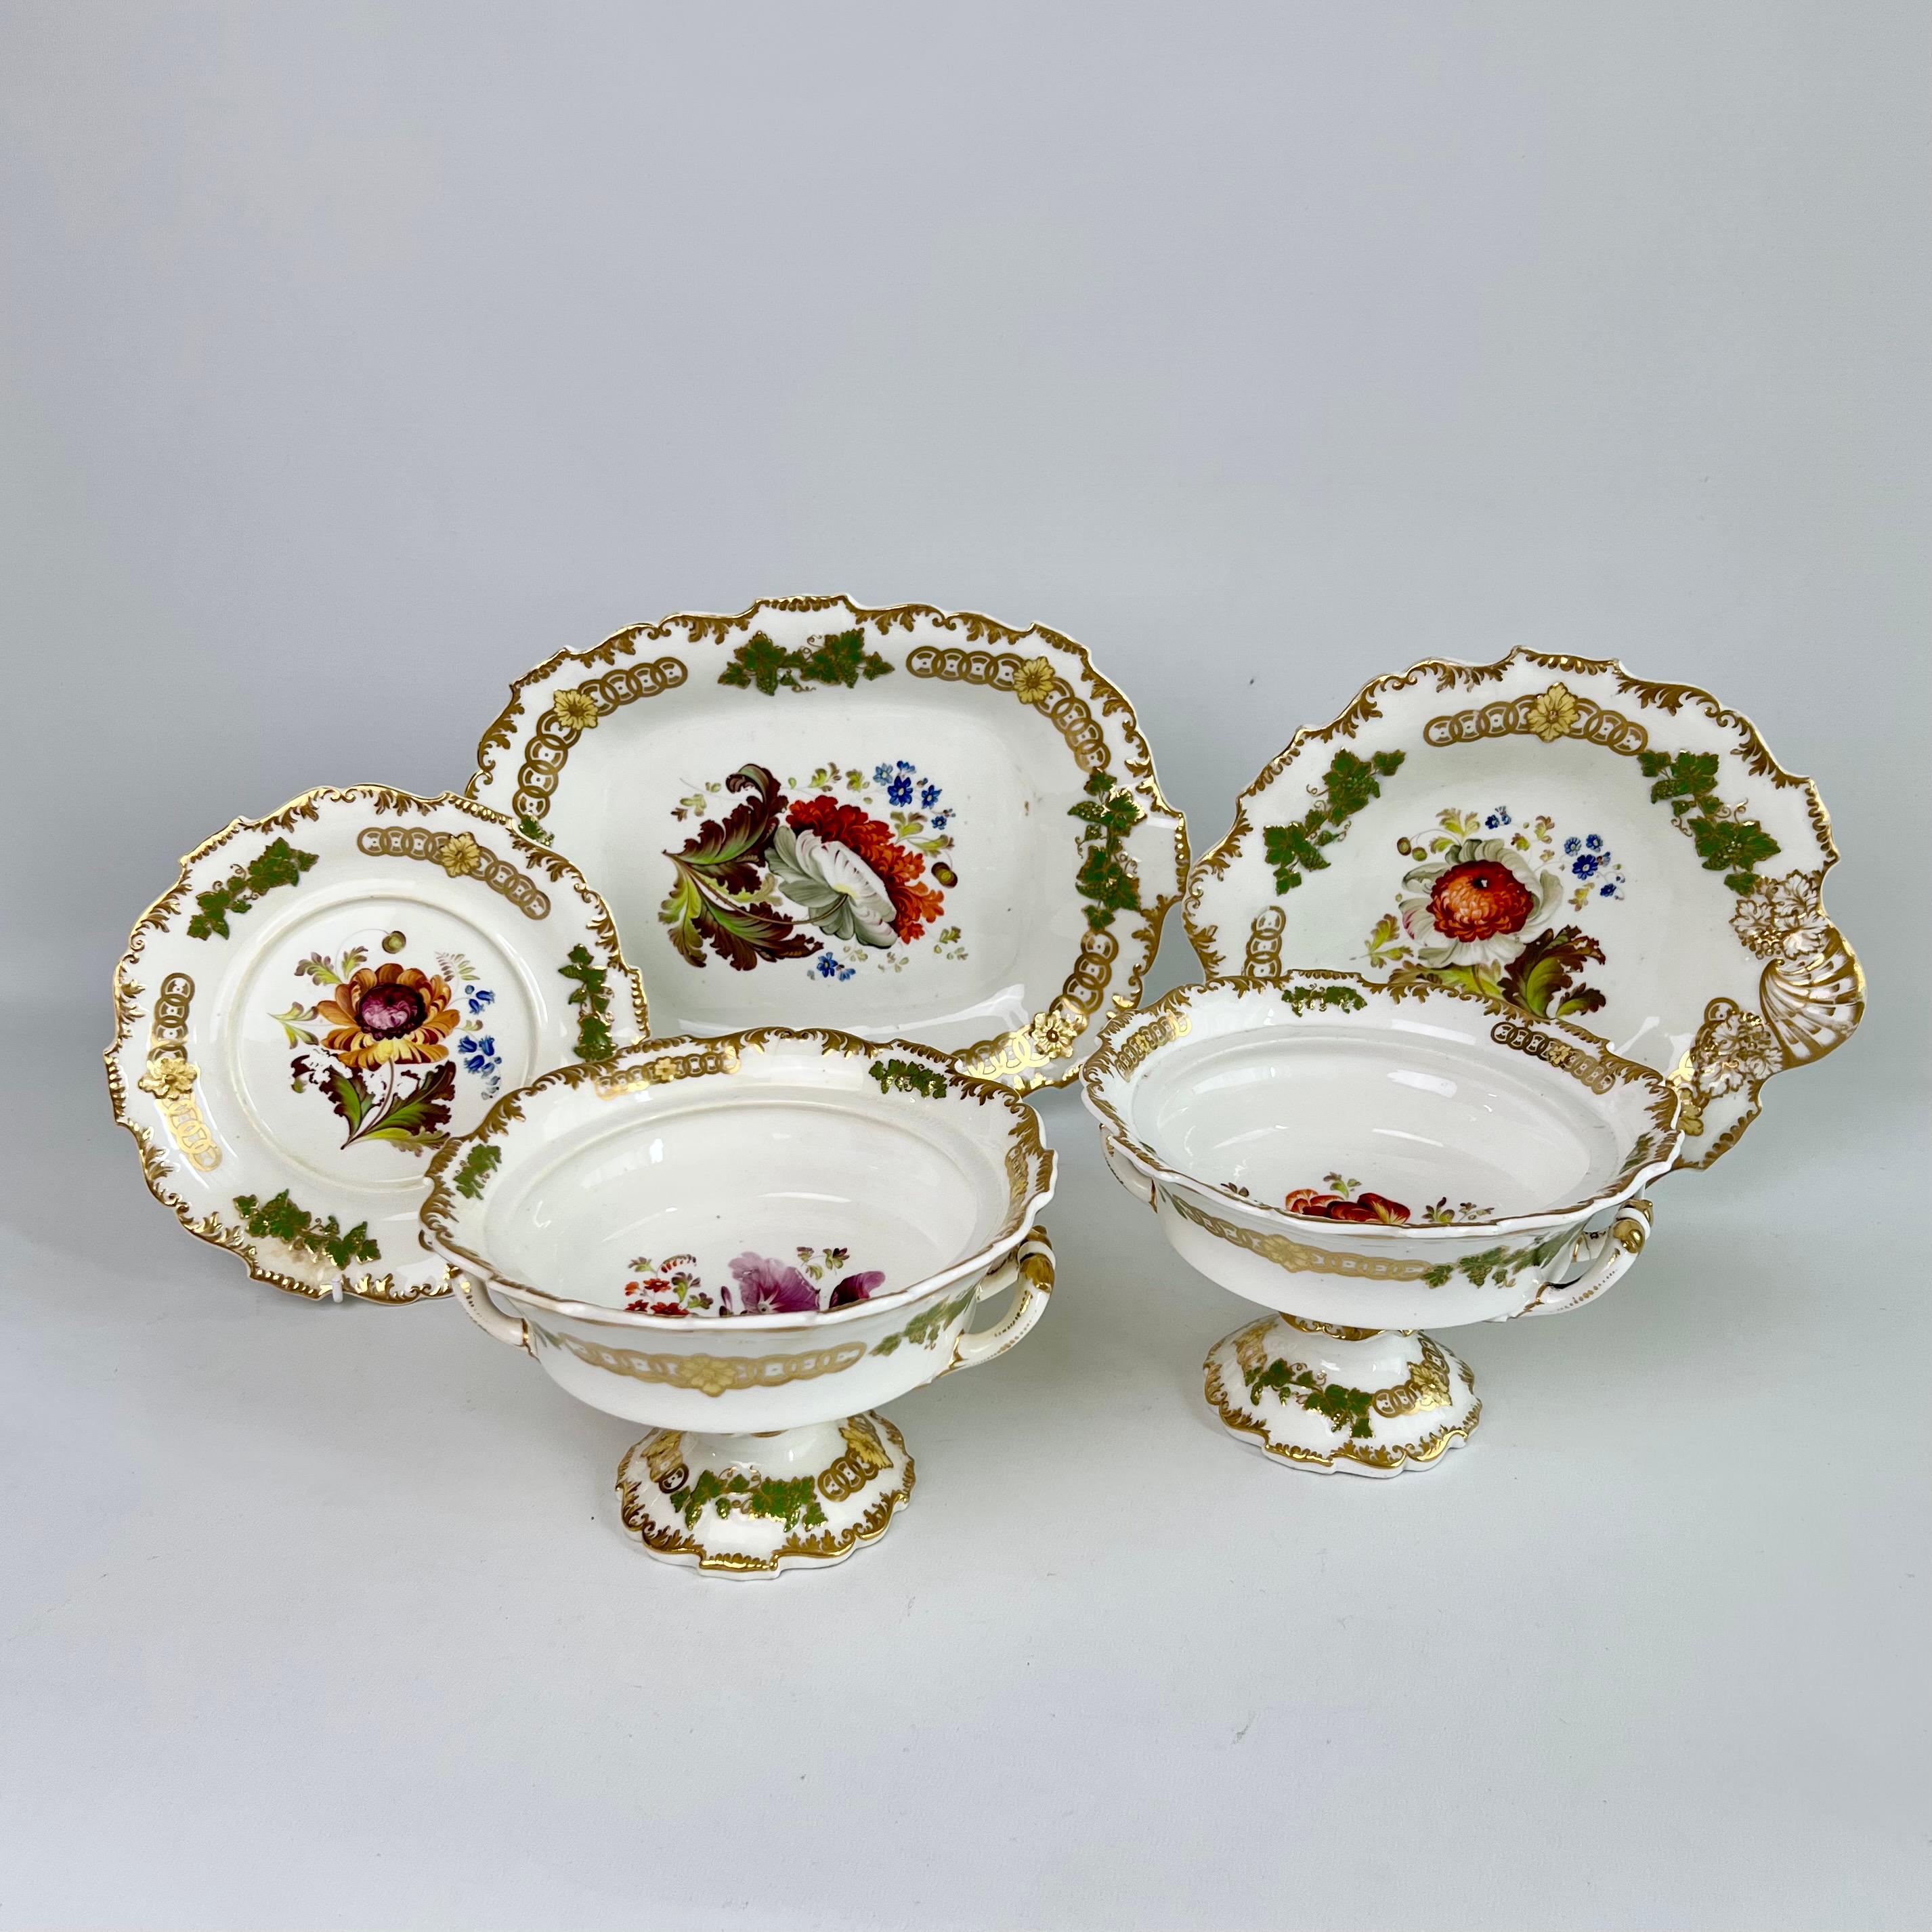 This is a stunning serving dish made by H&R Daniel in about 1827. It is made in the popular Shrewsbury shape and has a beautiful red dahlia in the centre. This dish would have belonged to a large dessert service.

We have several items of this